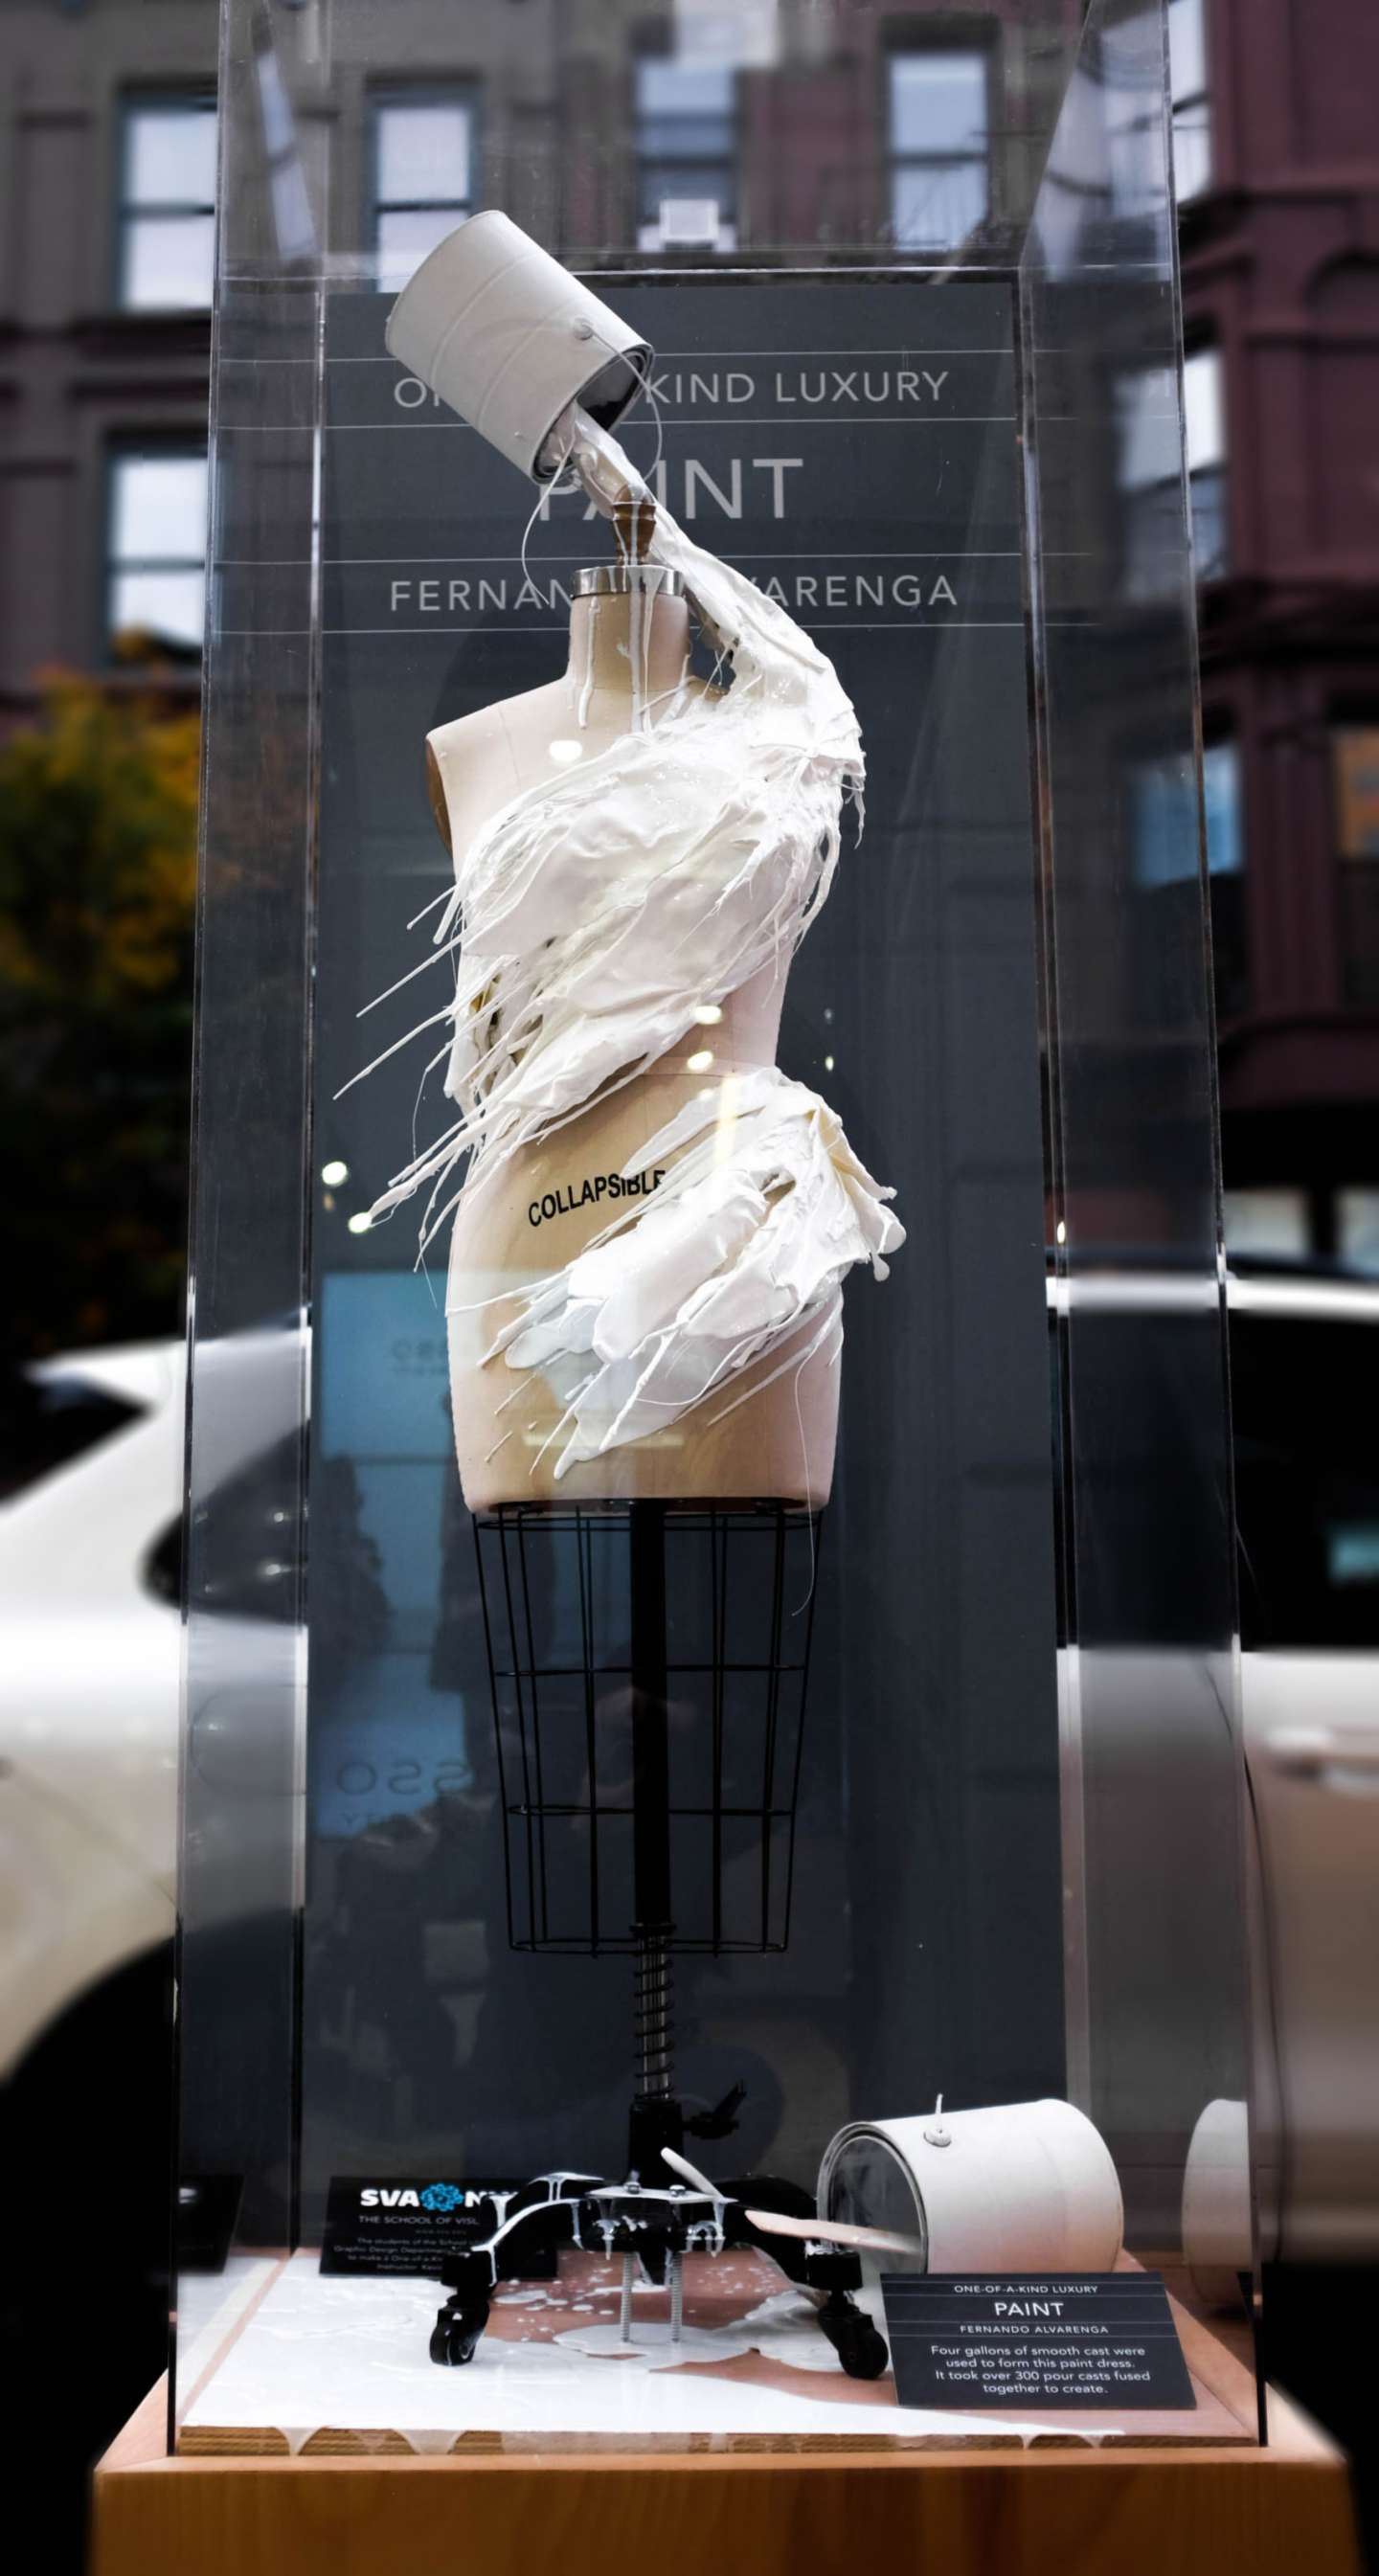 One of a Kind Luxury: Paint Dress